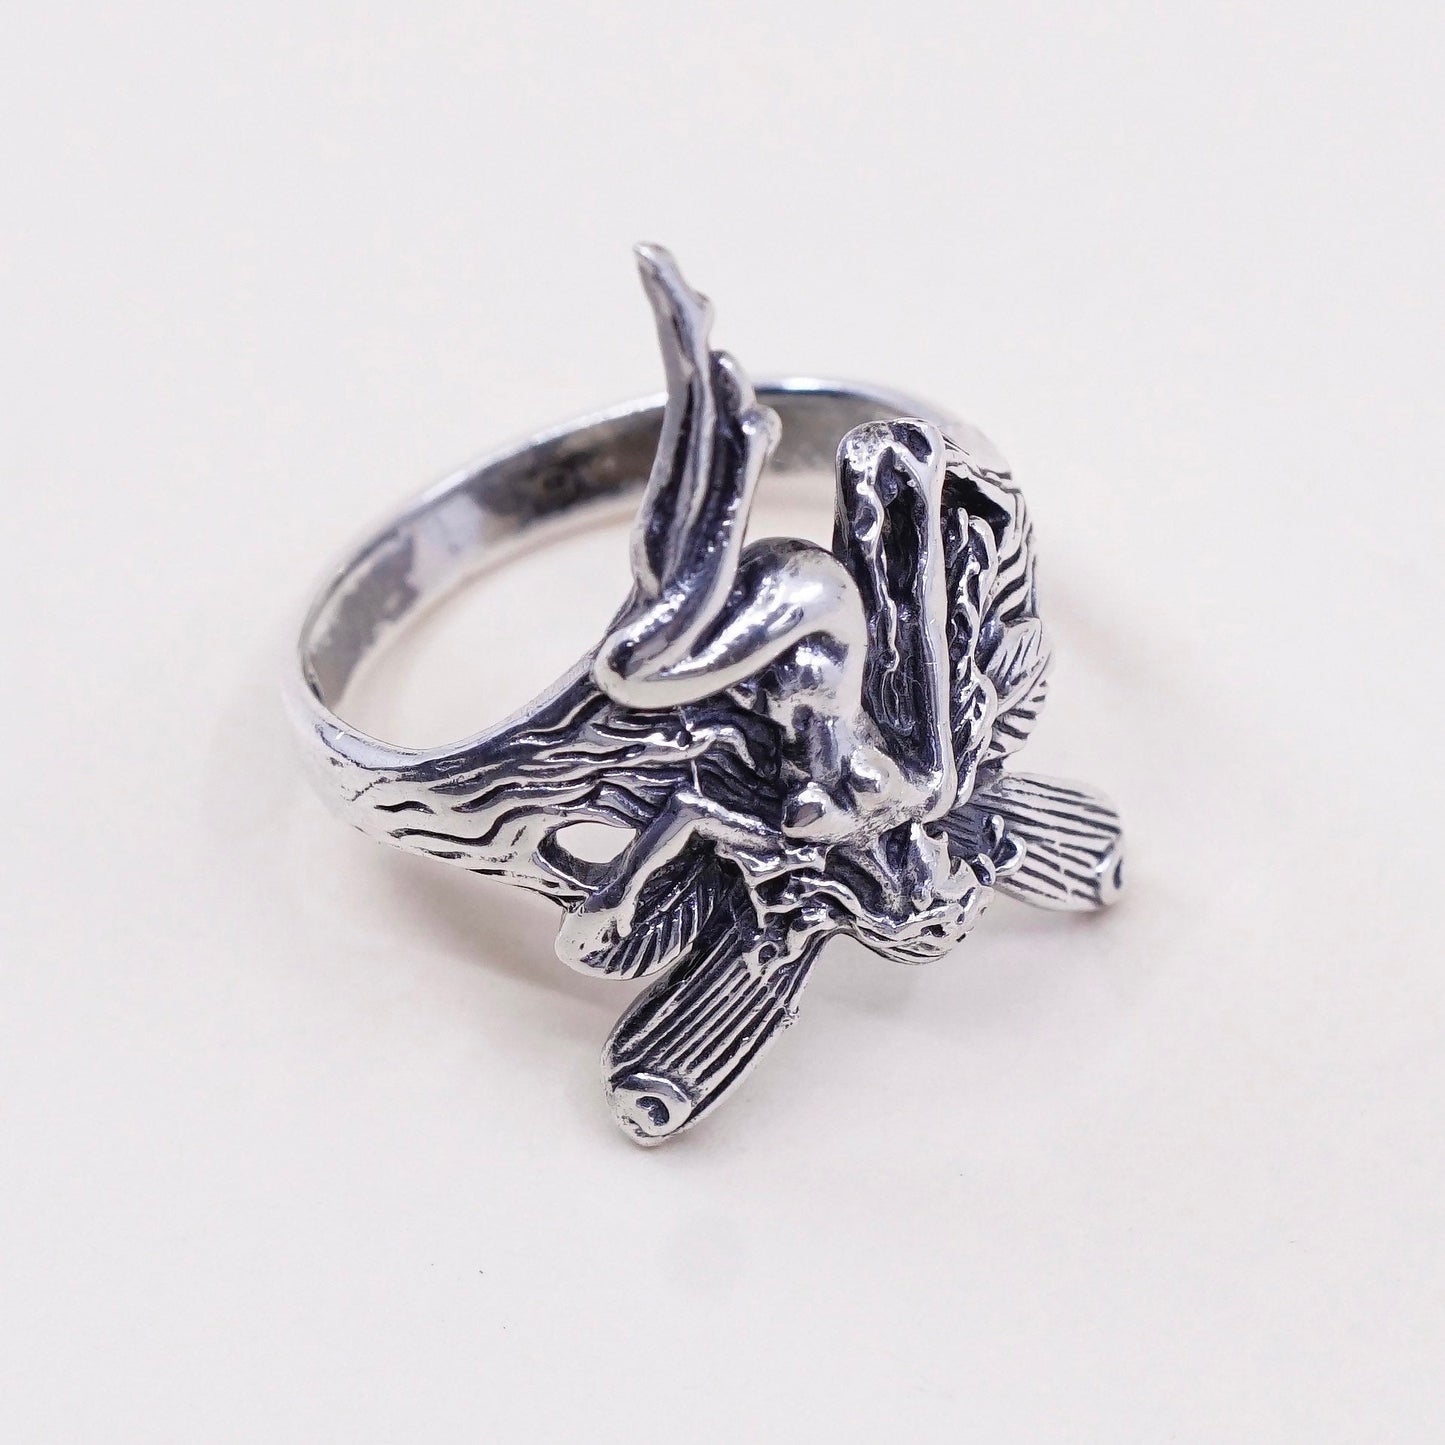 Size 6, vintage Sterling silver handmade ring, solid 925 silver fairy band